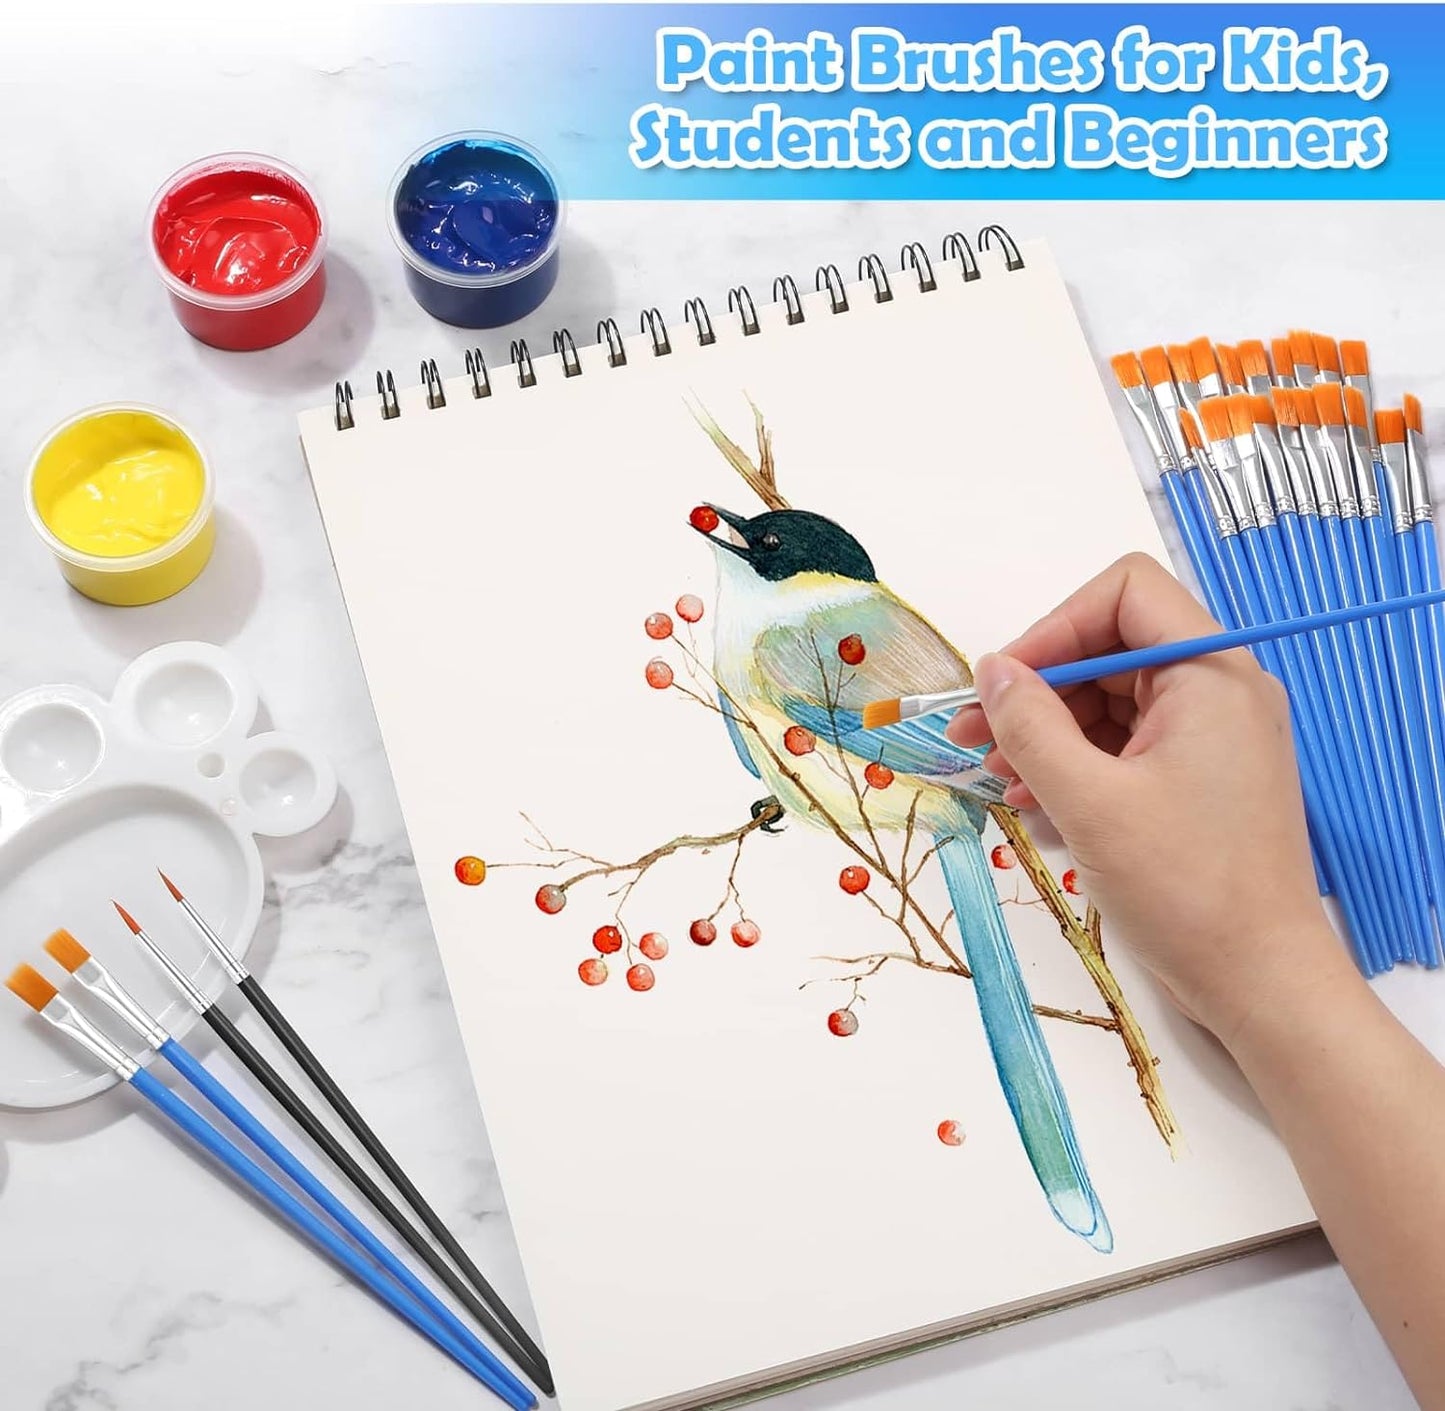 200 Pcs Small Paint Brushes Bulk,  Kids Paint Brushes Detail Fine Brushes with Flat and round Tip Acrylic Paint Brushes Set for Classroom Water Color Canvas Painting Touch Up